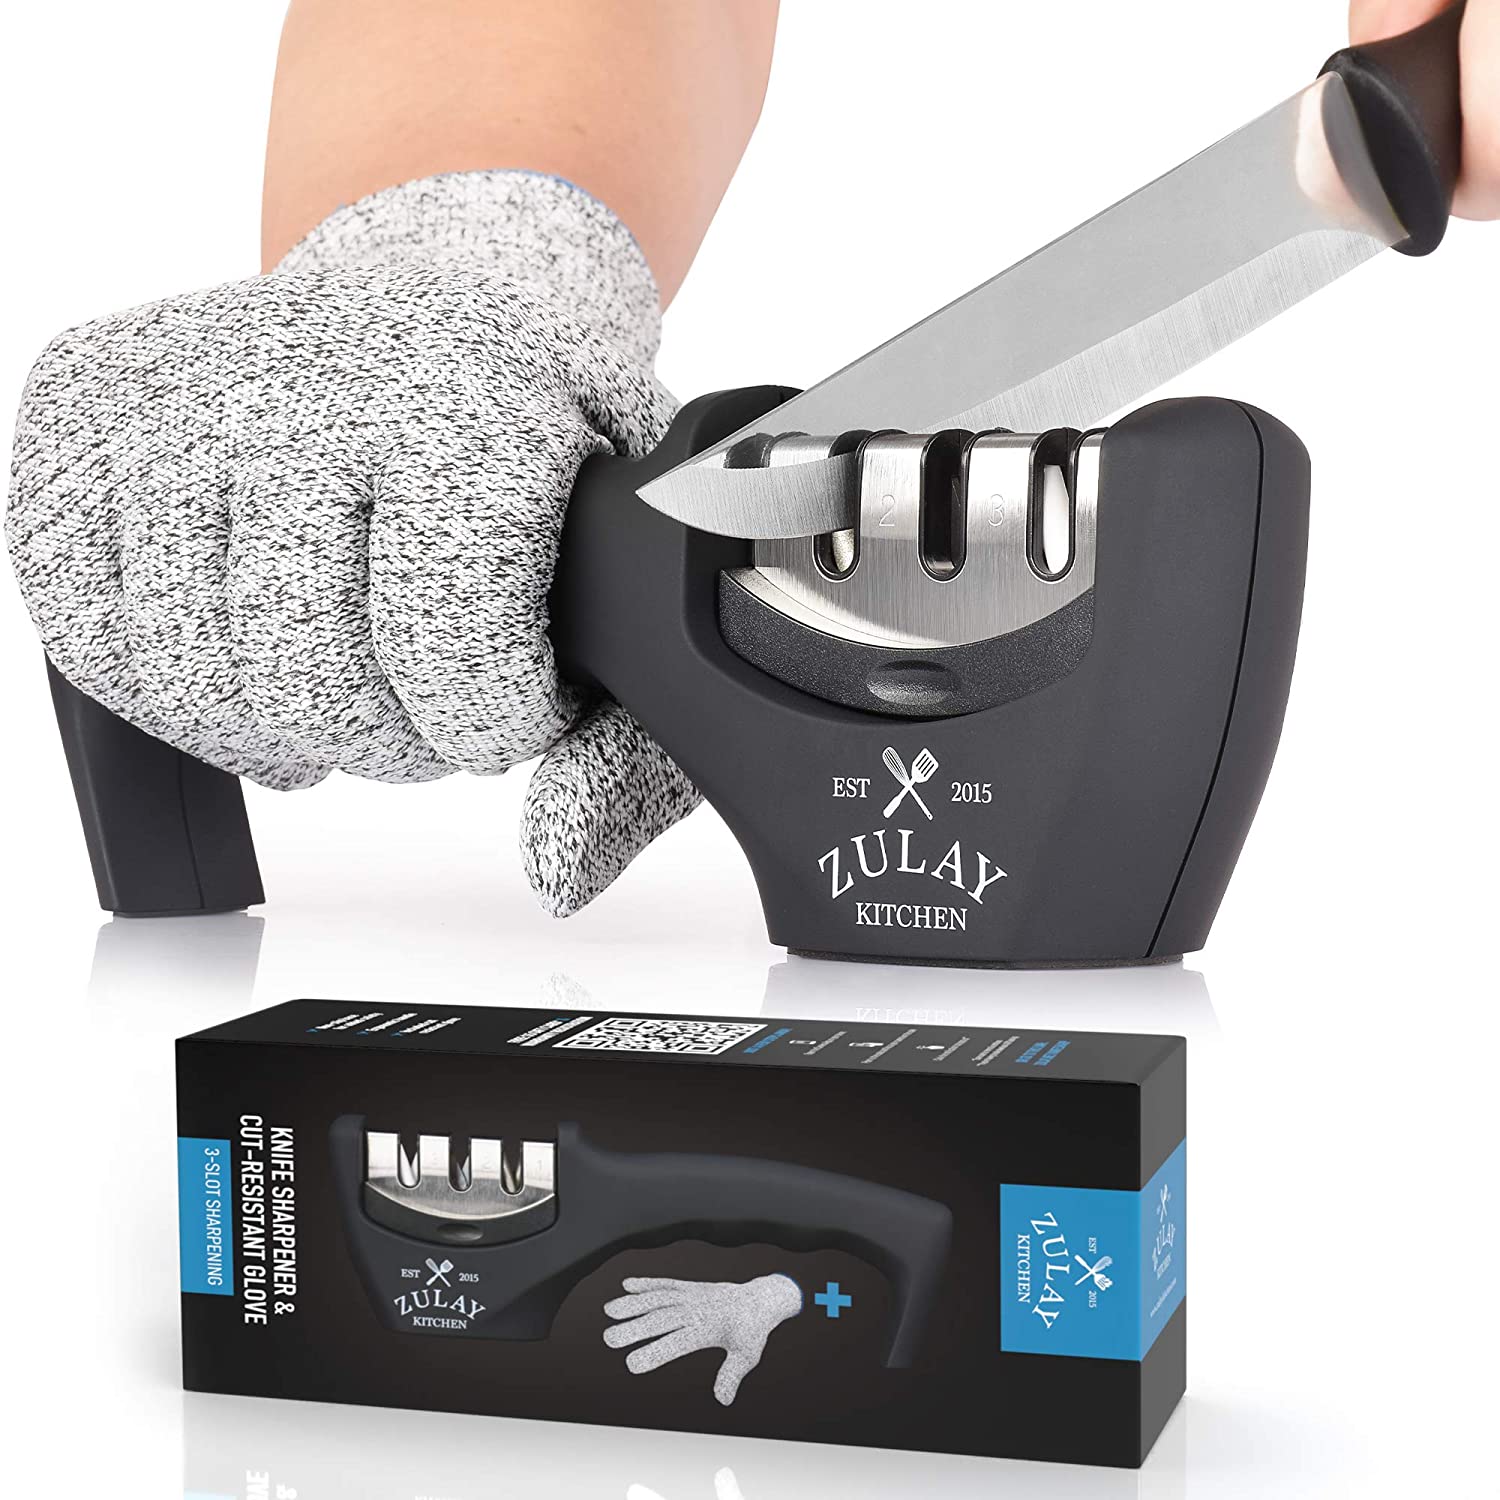 Zulay Premium Quality Knife Sharpener for Straight and Serrated Knives